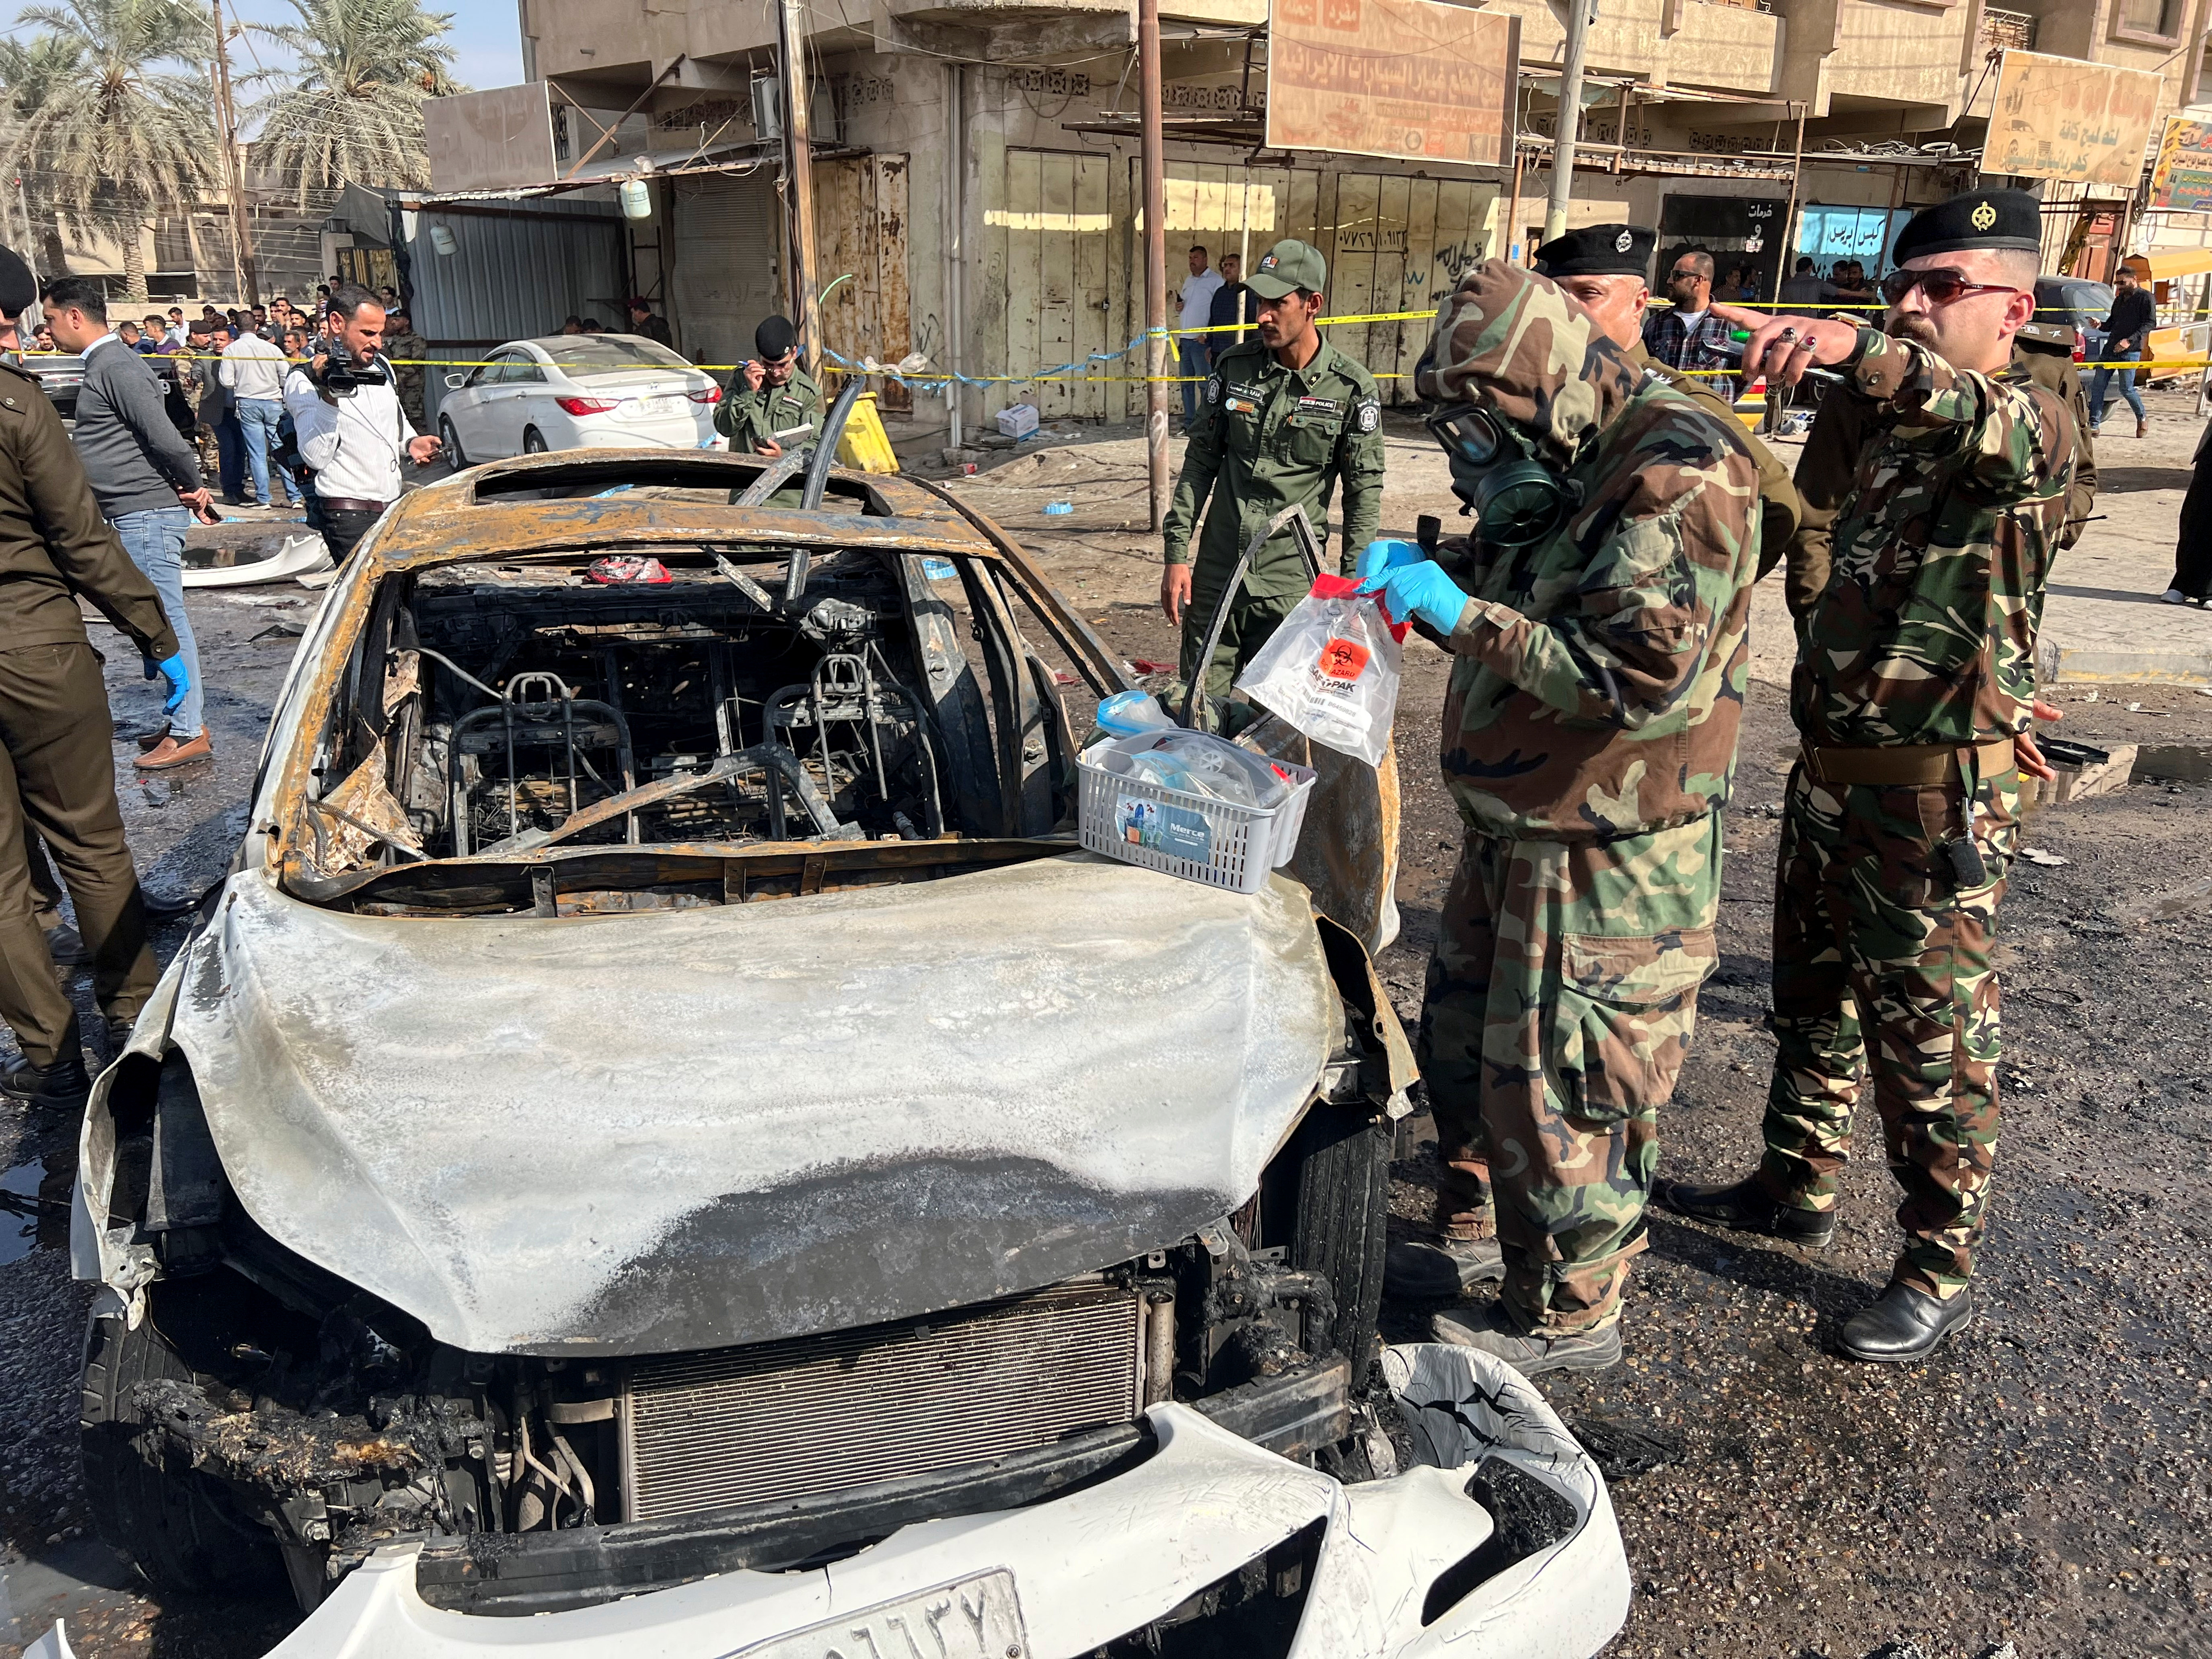 Iraqi security forces inspect site of explosion in Basra